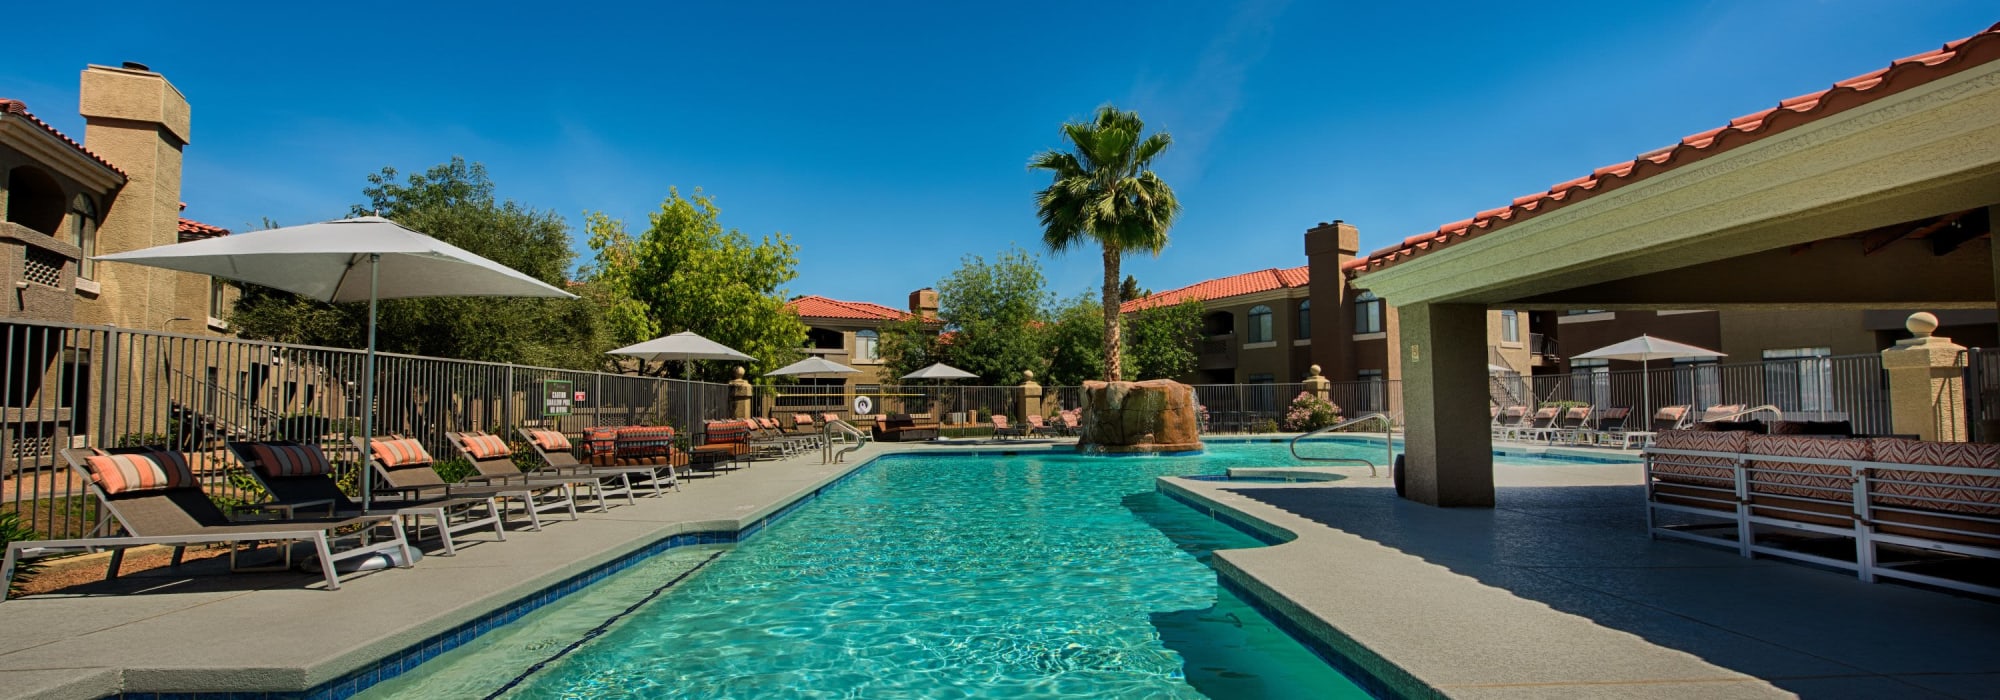 Sparkling pool and deck at The Ventura in Chandler, Arizona